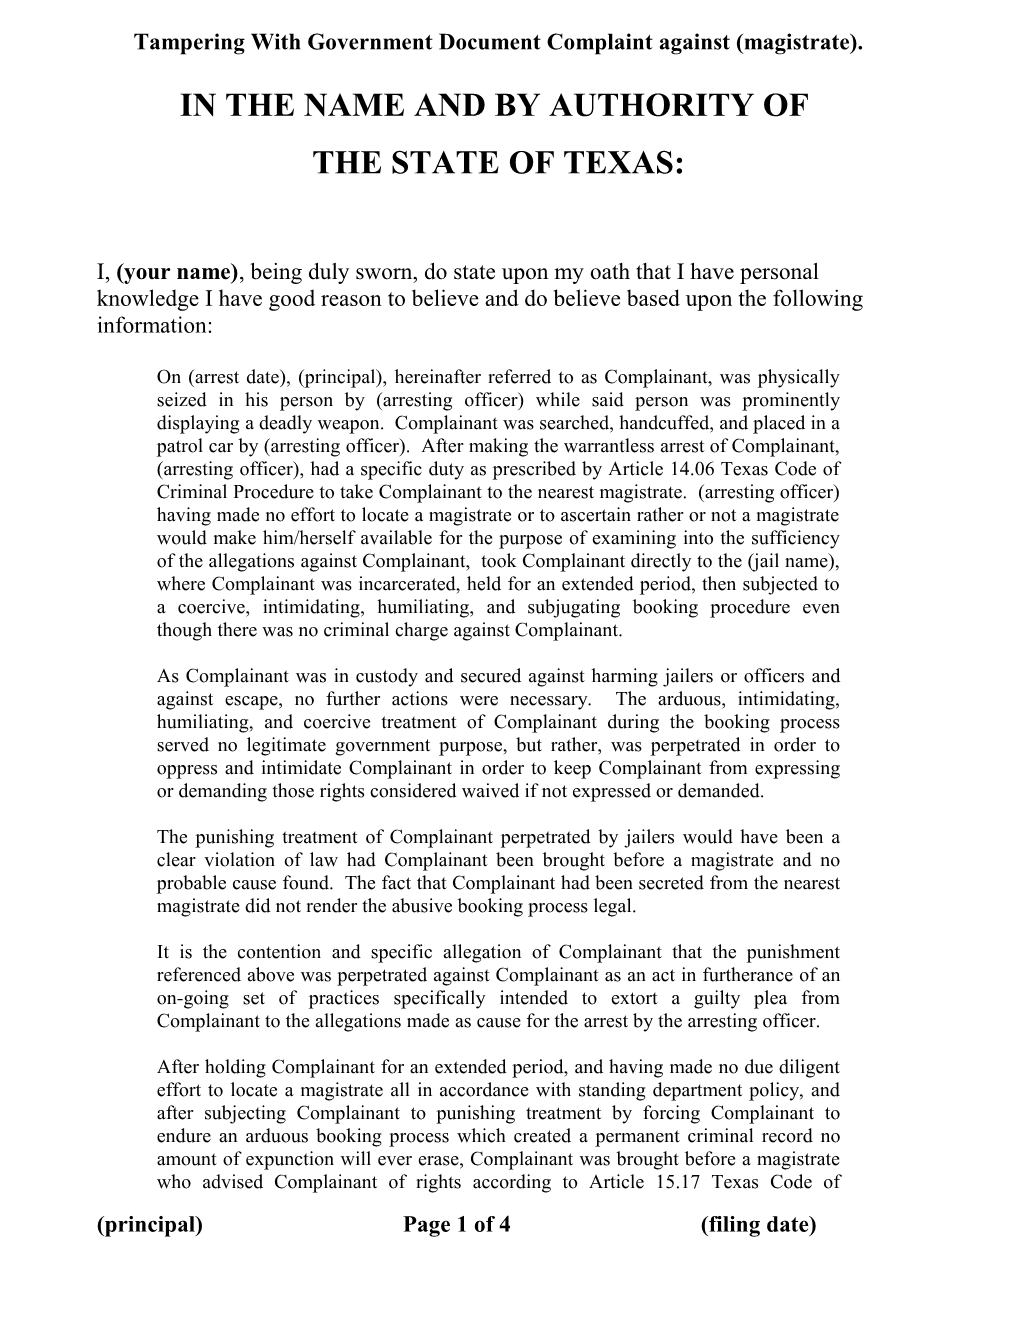 In the Name and by Authority of the State of Texas